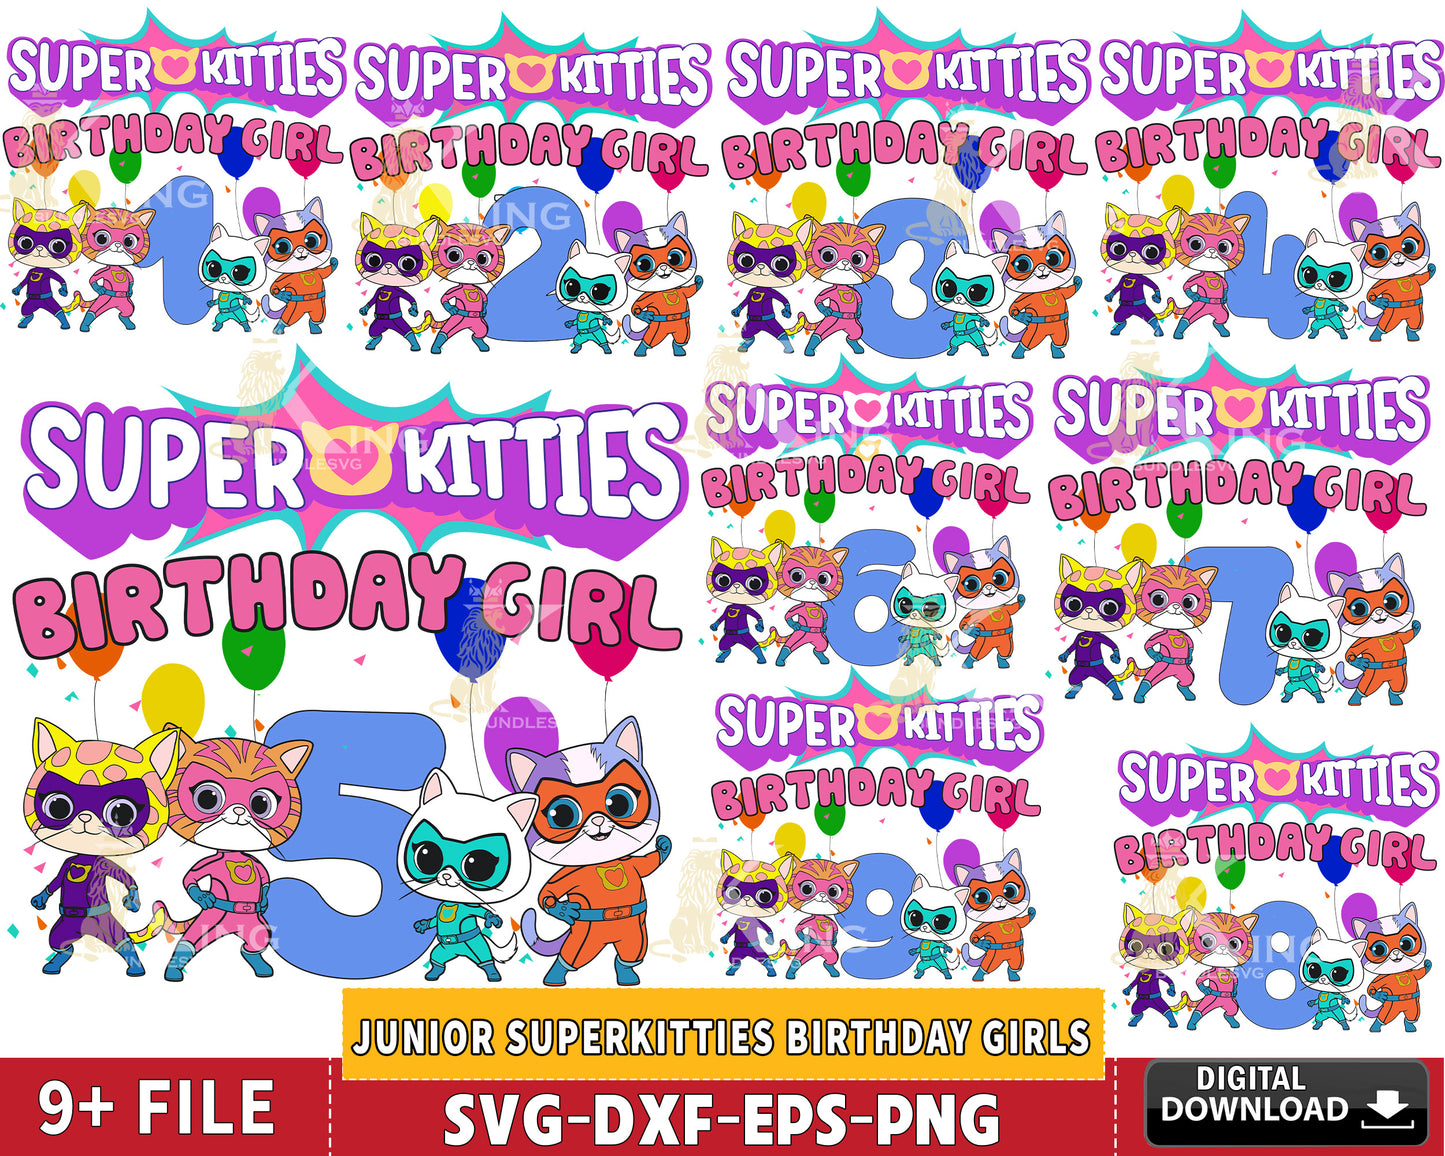 Junior SuperKitties Birthday Girls Number svg ,9 file Superkitties SVG DXF EPS PNG , for Cricut, Silhouette, Digital download ,Instant Download